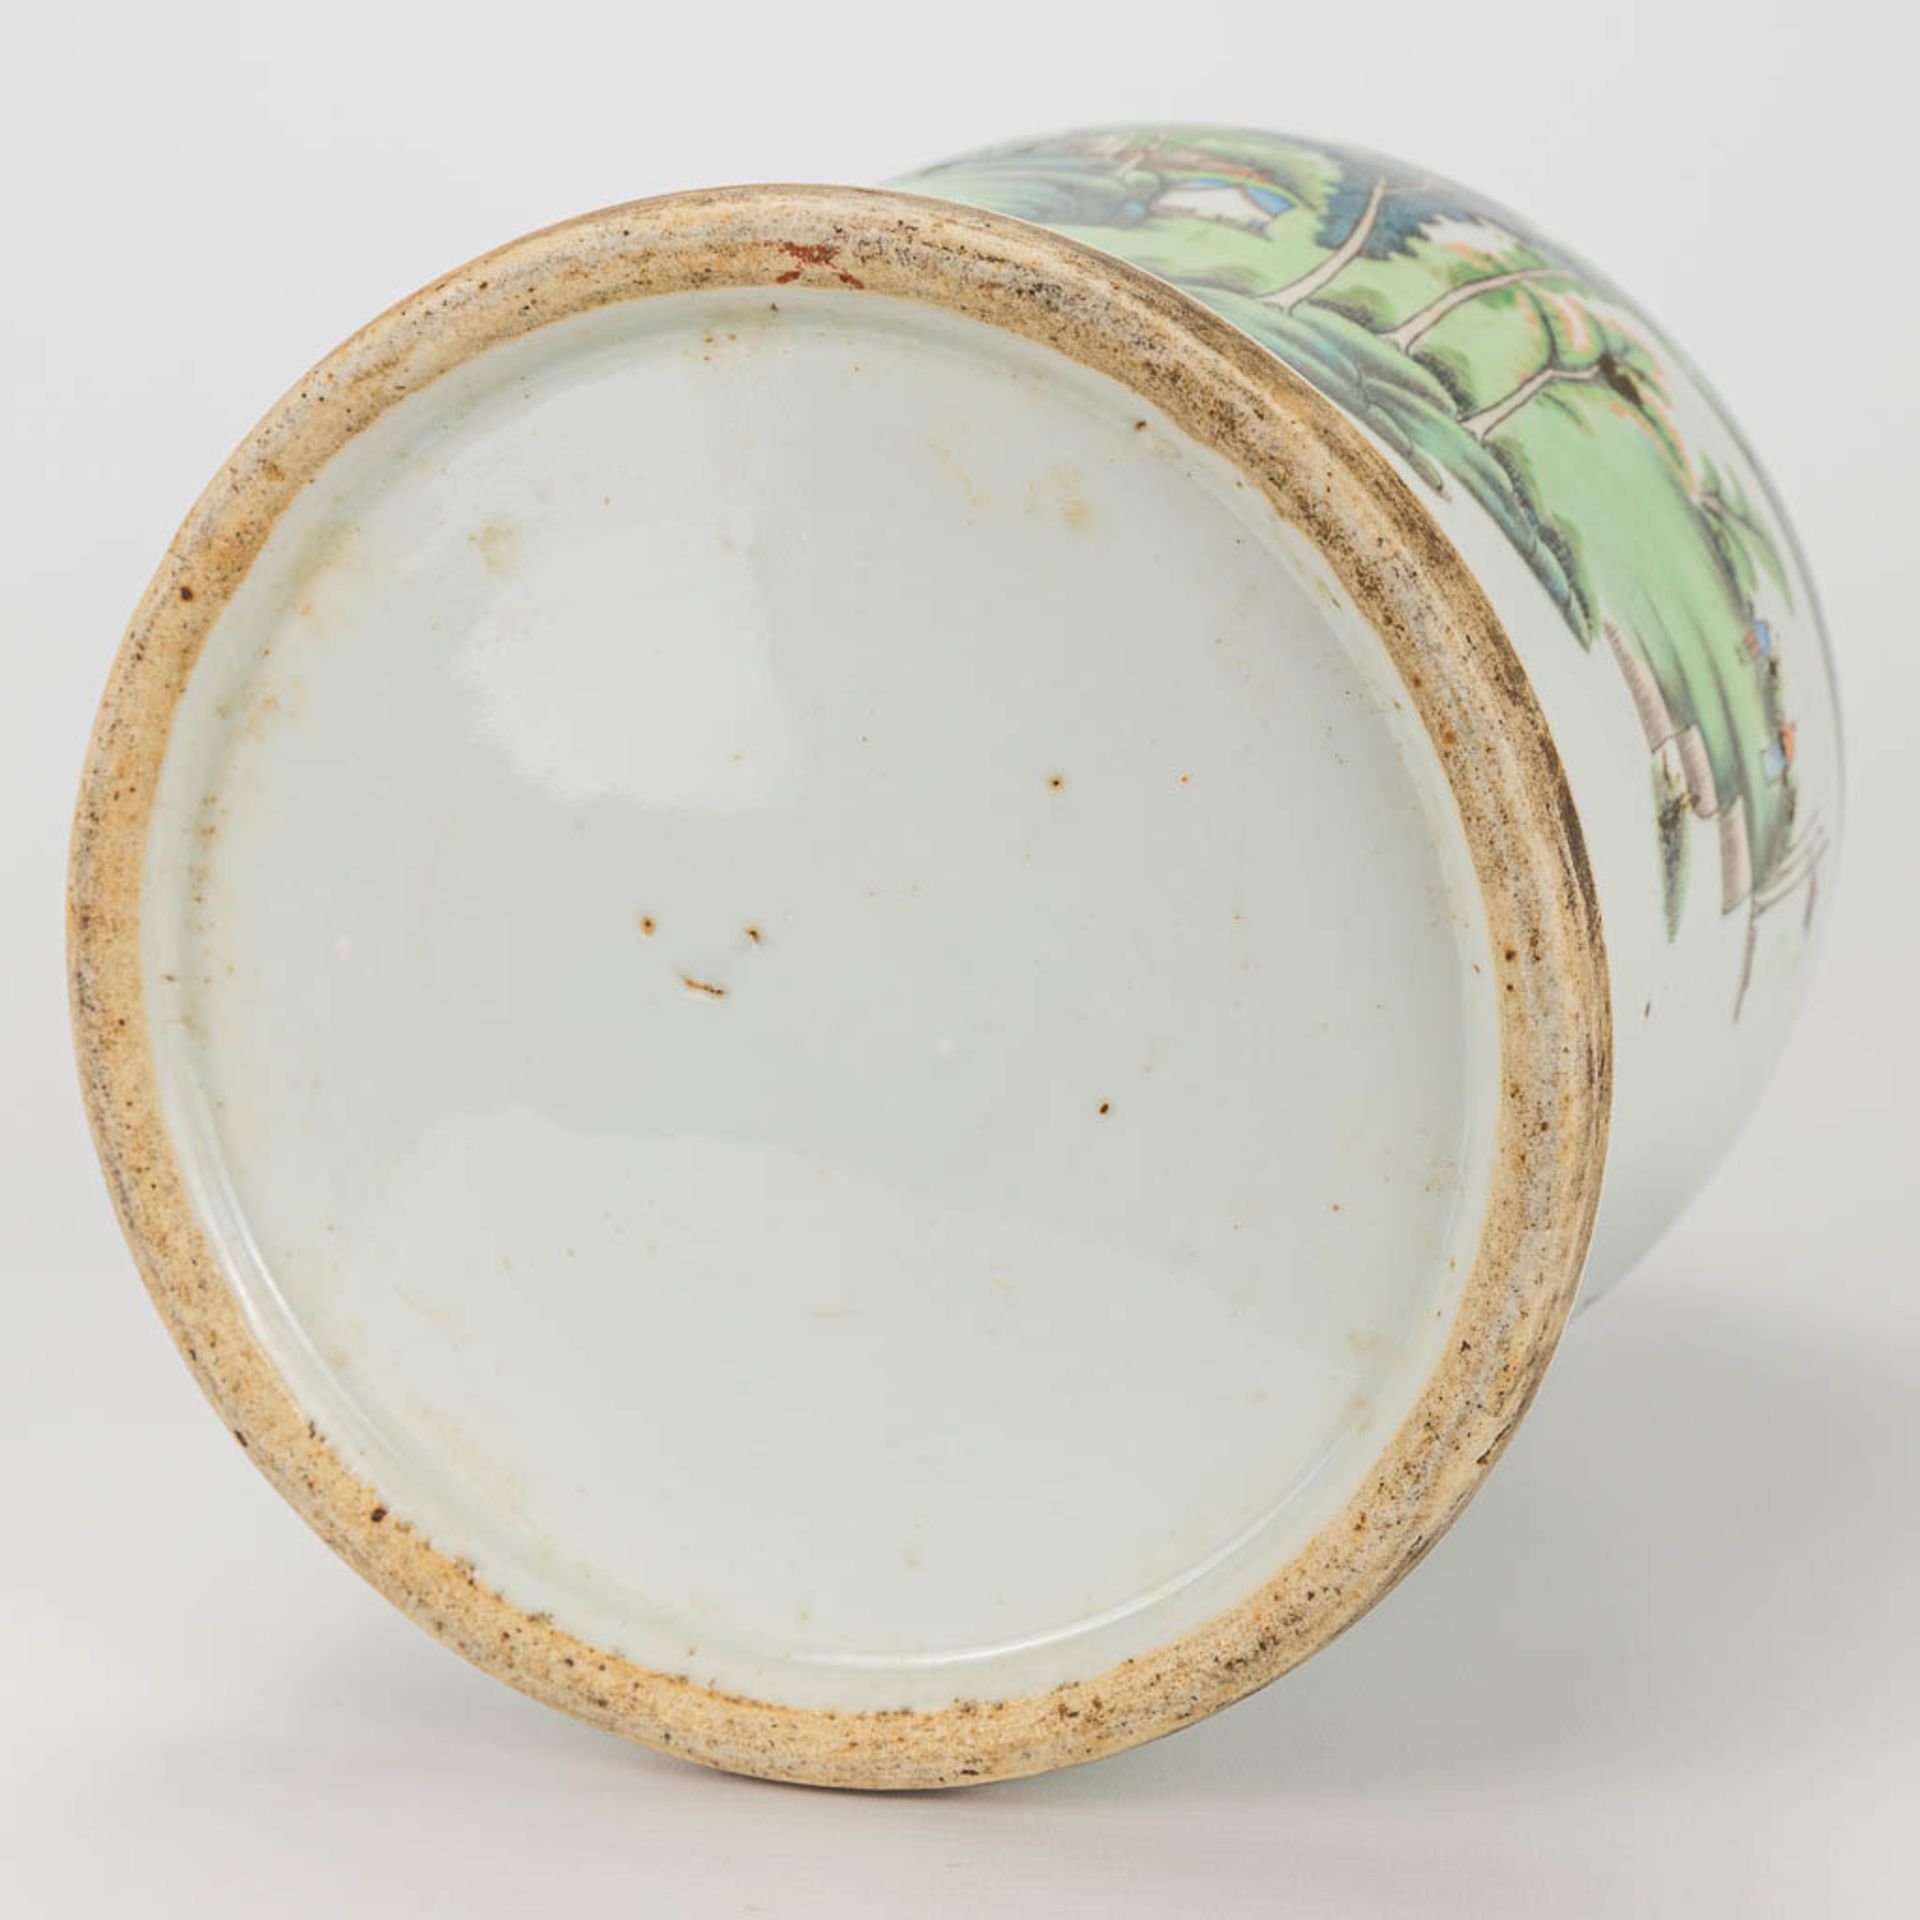 A vase with lid made of Chinese porcelain and decorated with landscapes - Image 13 of 19